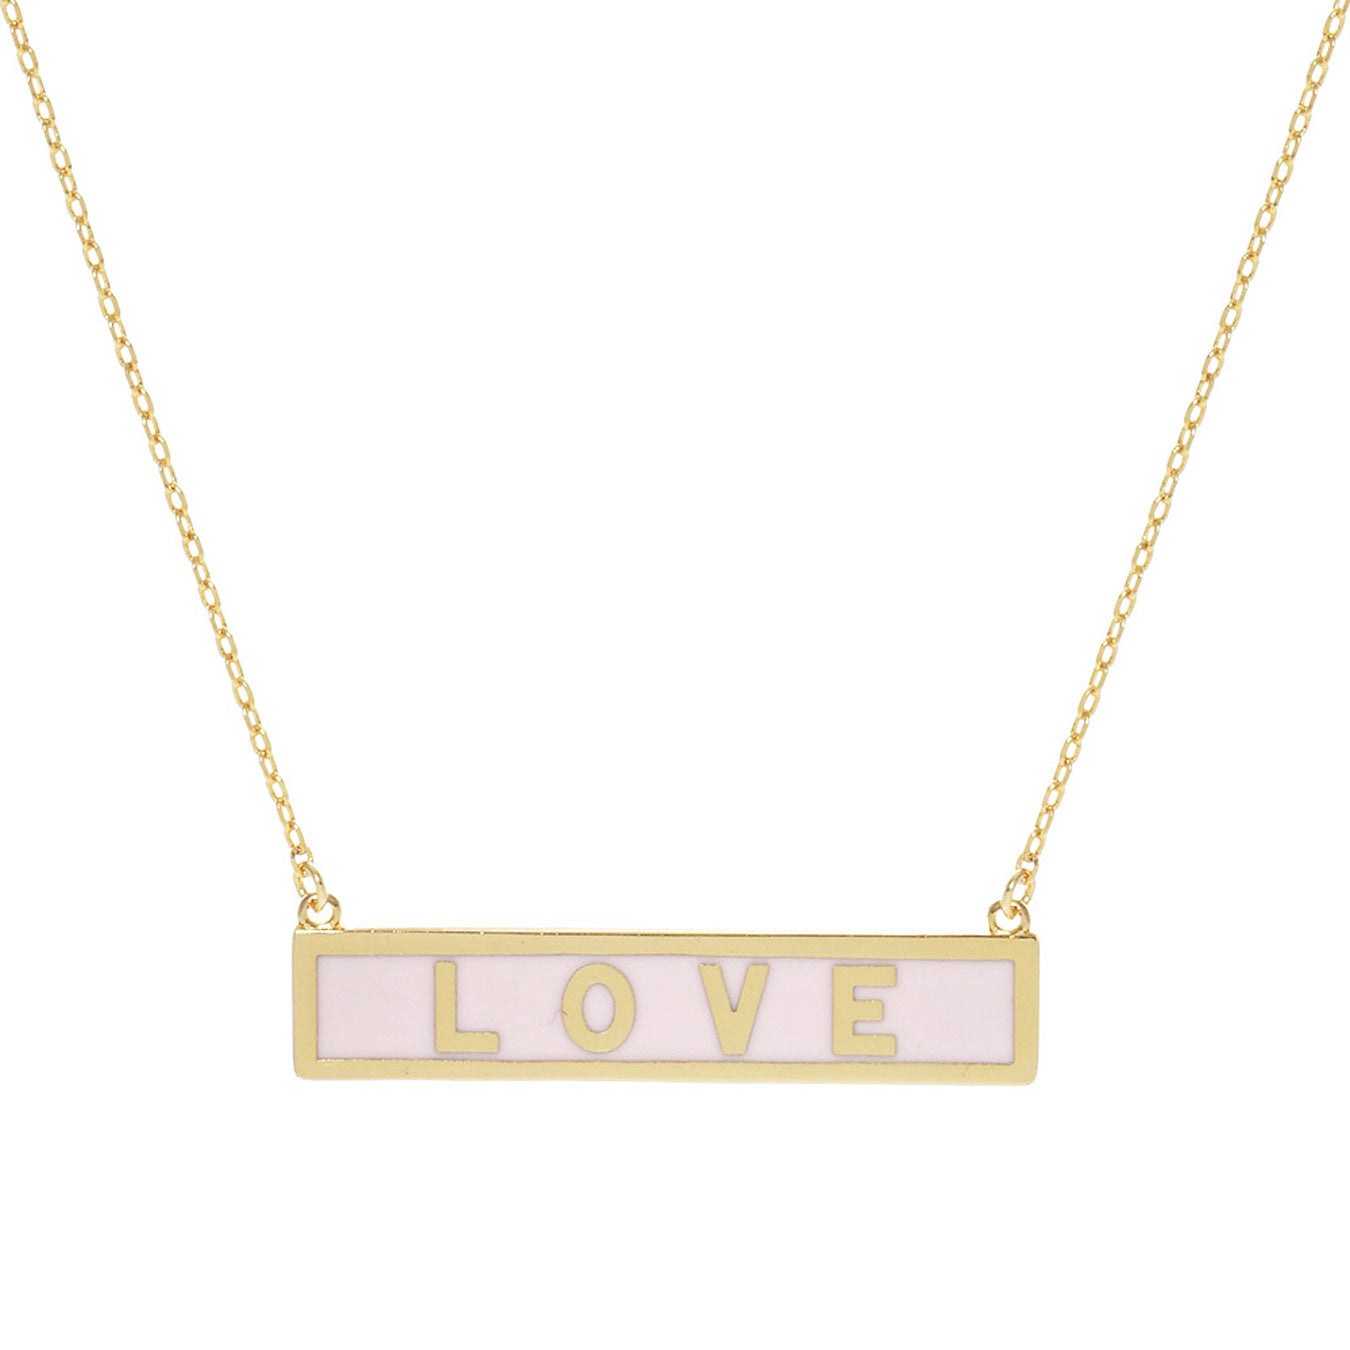 Pink Love Gold Dipped Enamel Rectangle Message Pendant Necklace. Beautifully crafted design adds a gorgeous glow to any outfit. Jewelry that fits your lifestyle! Perfect Birthday Gift, Valentine's Gift, Anniversary Gift, Mother's Day Gift, Anniversary Gift, Graduation Gift, Prom Jewelry, Just Because Gift, Thank you Gift.